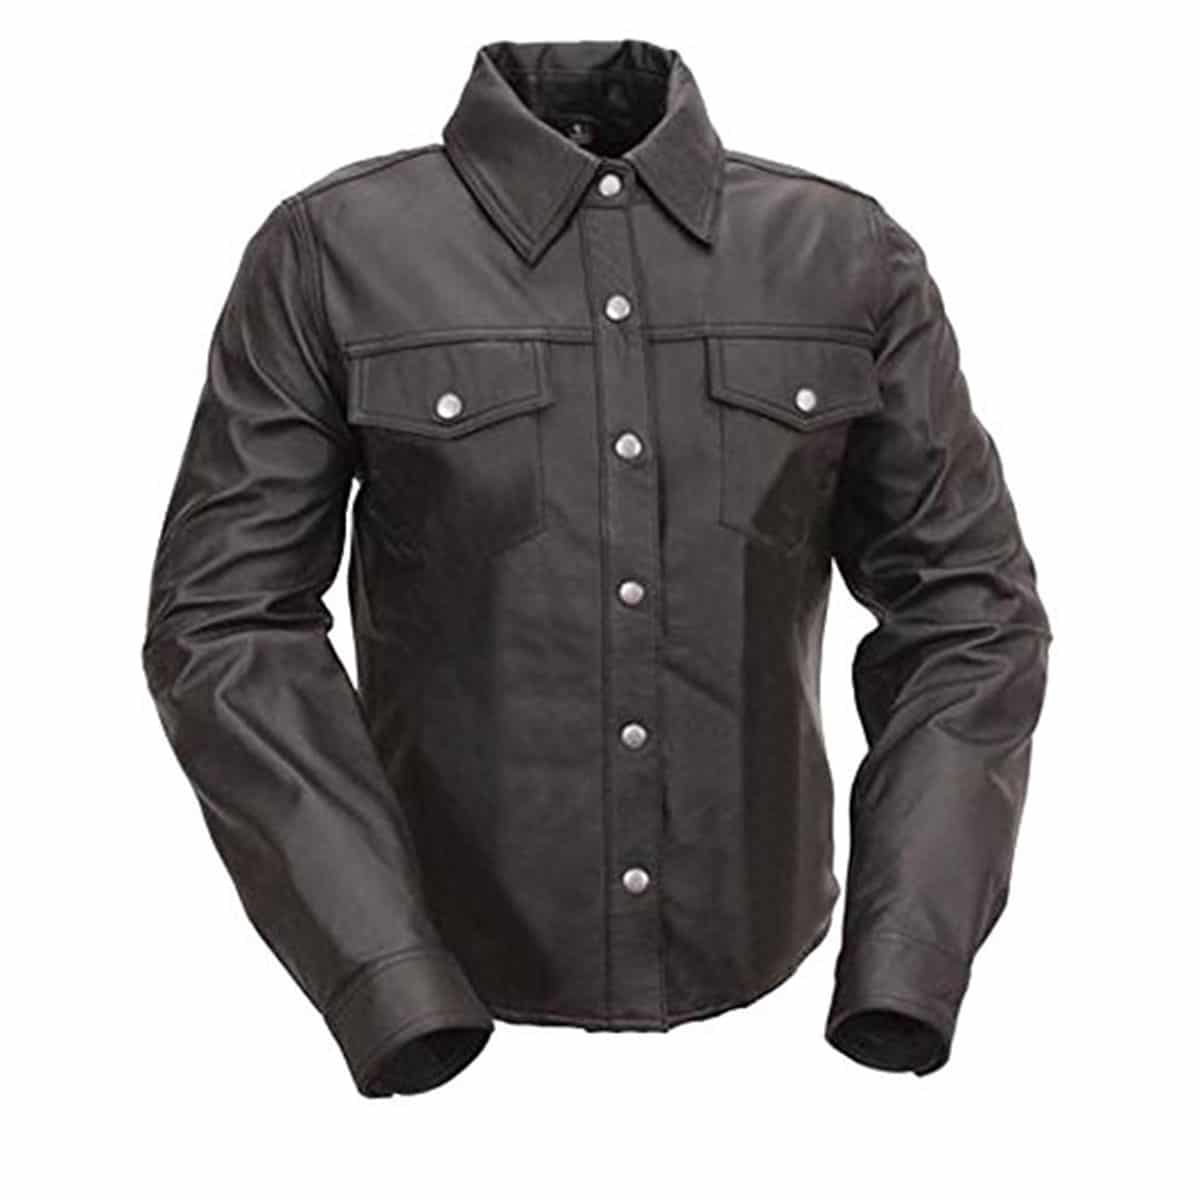 Mens Genuine Sheep Or Cow Black Leather Police Uniform Style Shirt - (PSF-BLK)